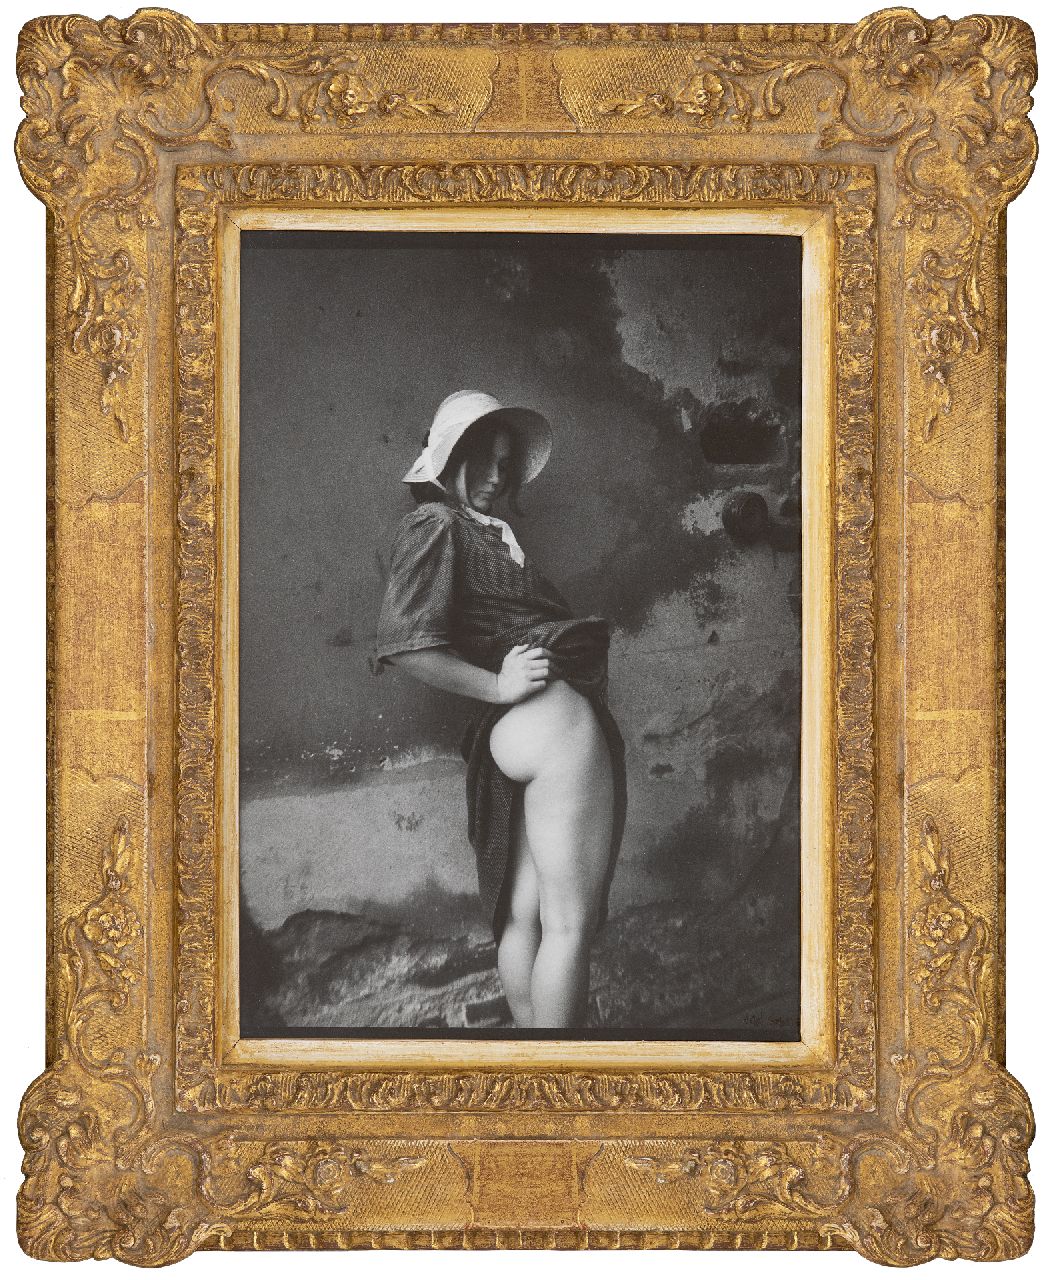 Saudek J.  | Jan Saudek | Prints and Multiples offered for sale | Olga Again, photograph 29.9 x 23.6 cm, signed l.r. and exectuted ca. 1987